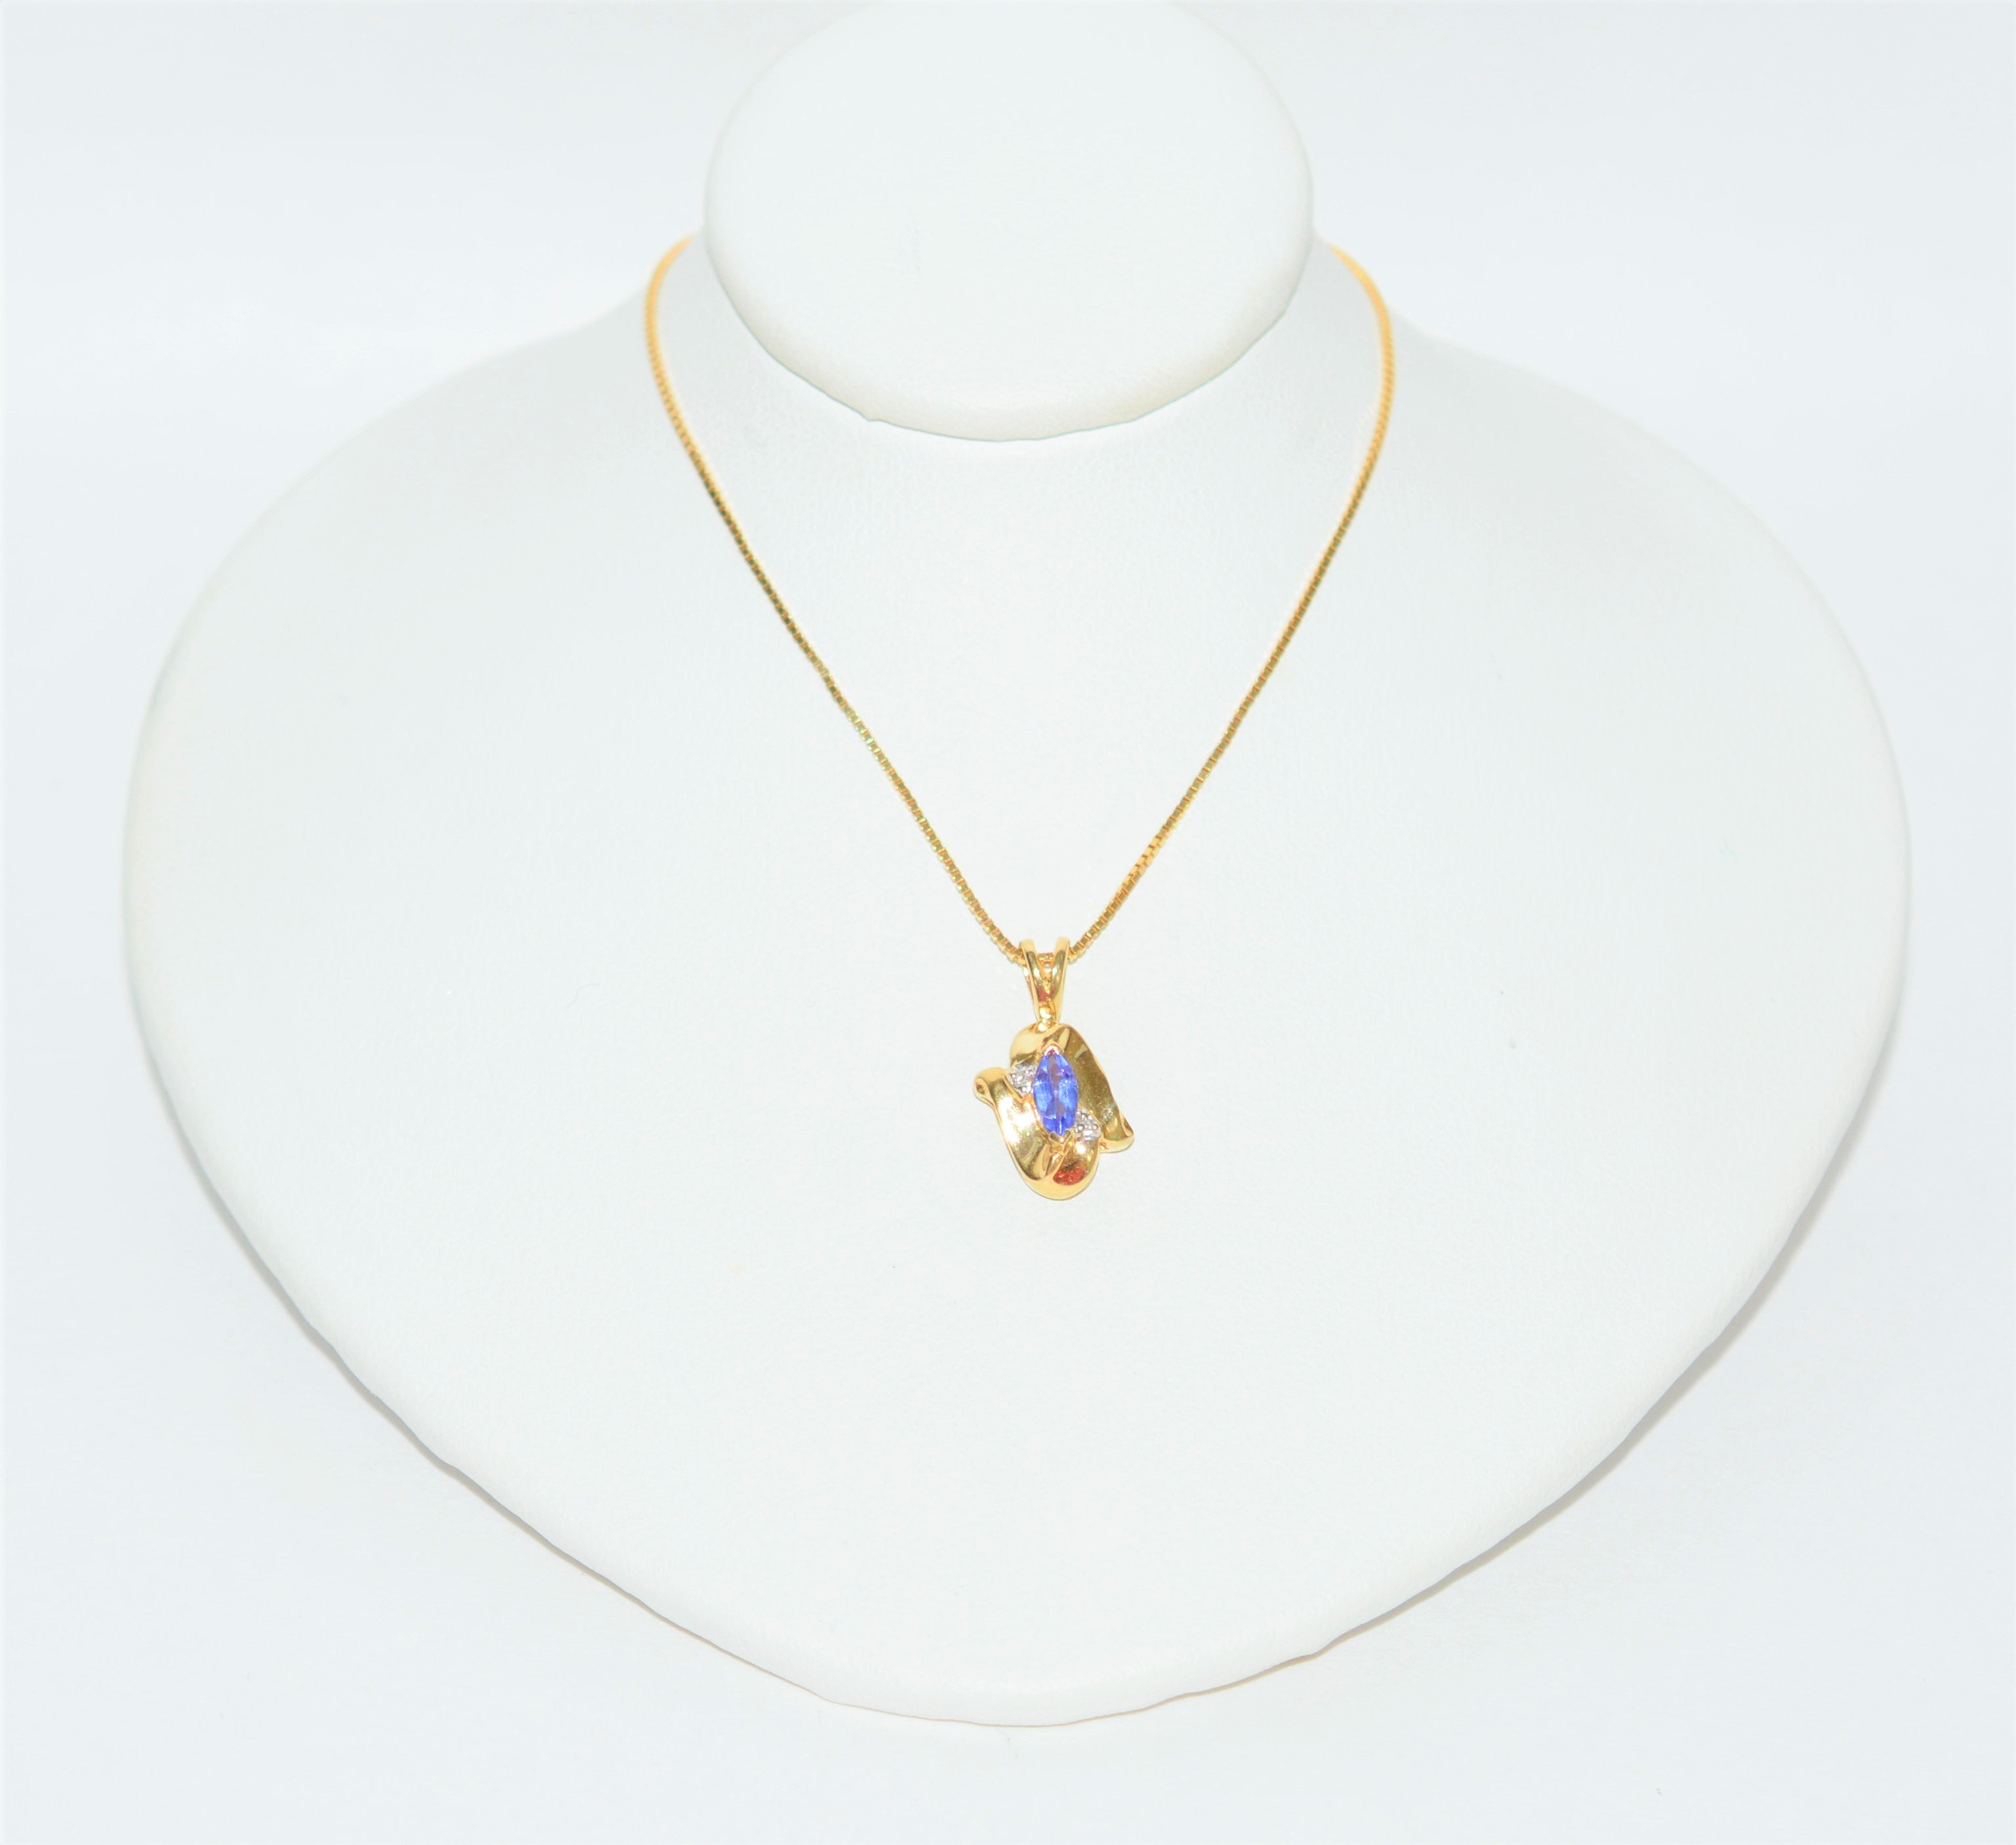 Natural Tanzanite & Diamond Necklace 14K Solid Gold .23tcw Pendant Necklace Statement Necklace Fine Jewelry Birthstone Estate Necklace